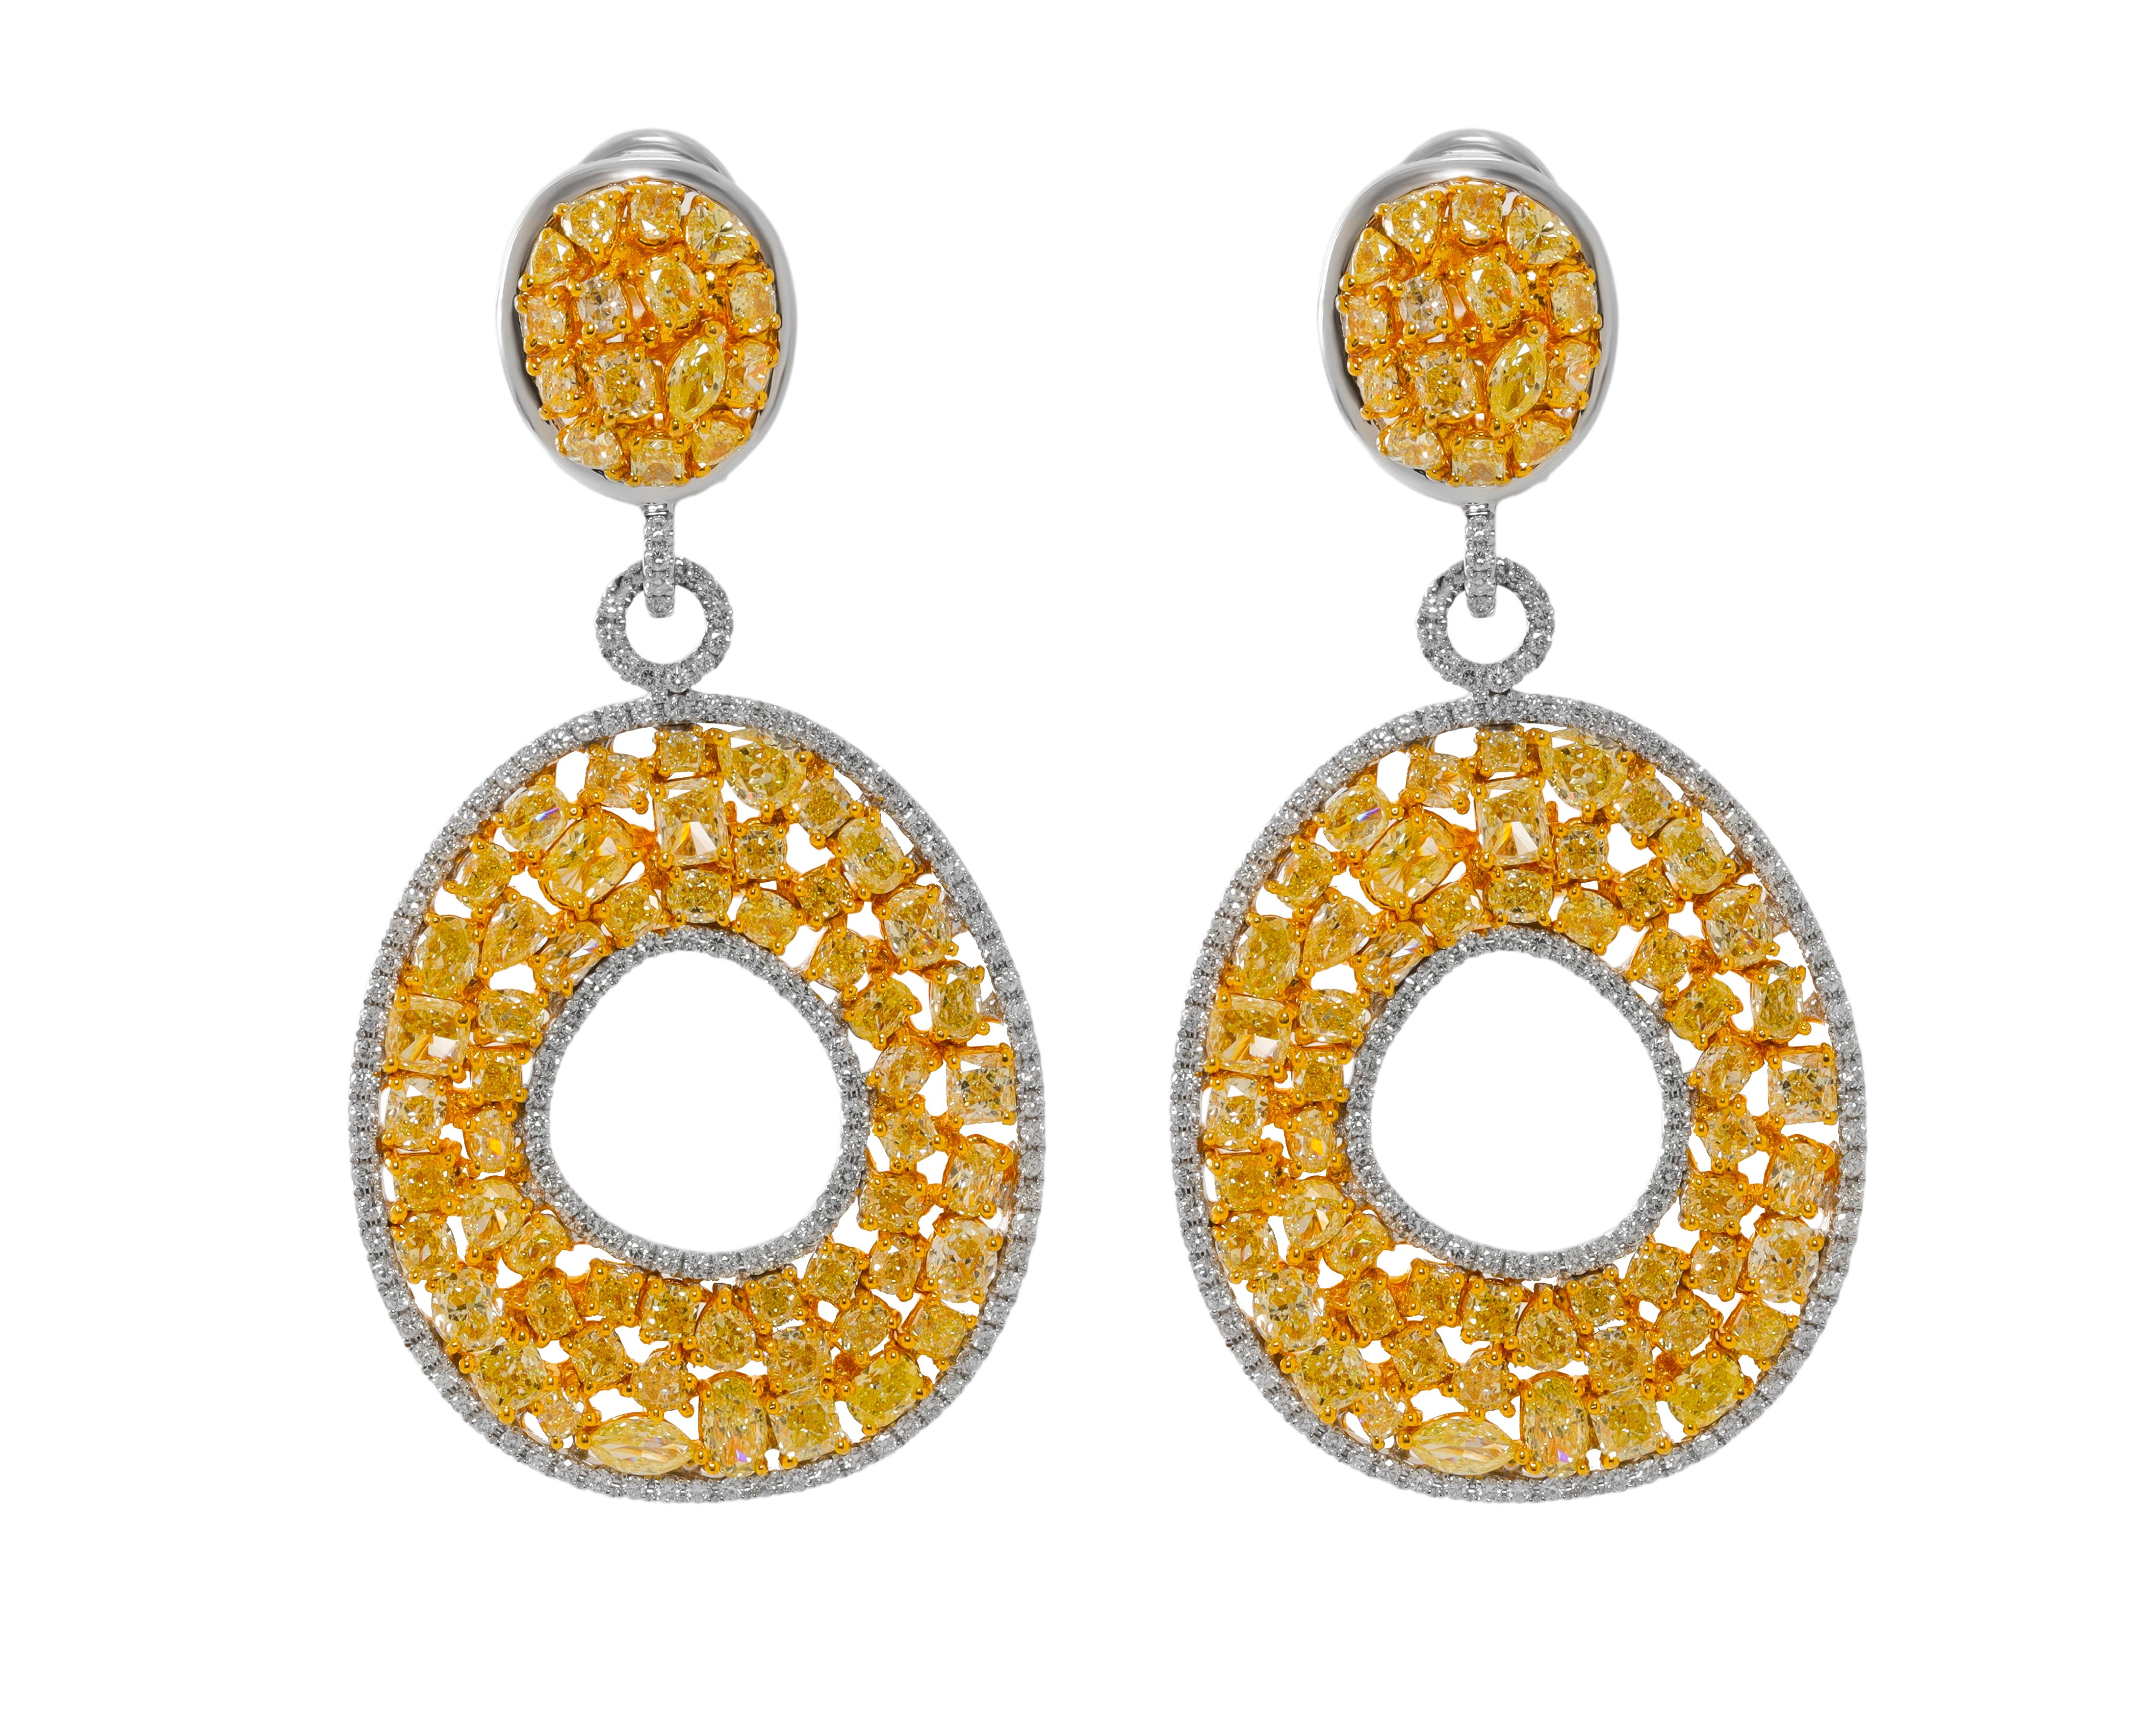 18 kt white gold diamond earrings adorned with 17.65 cts tw of yellow diamonds of various shapes.
Diana M. is a leading supplier of top-quality fine jewelry for over 35 years.
Diana M is one-stop shop for all your jewelry shopping, carrying line of